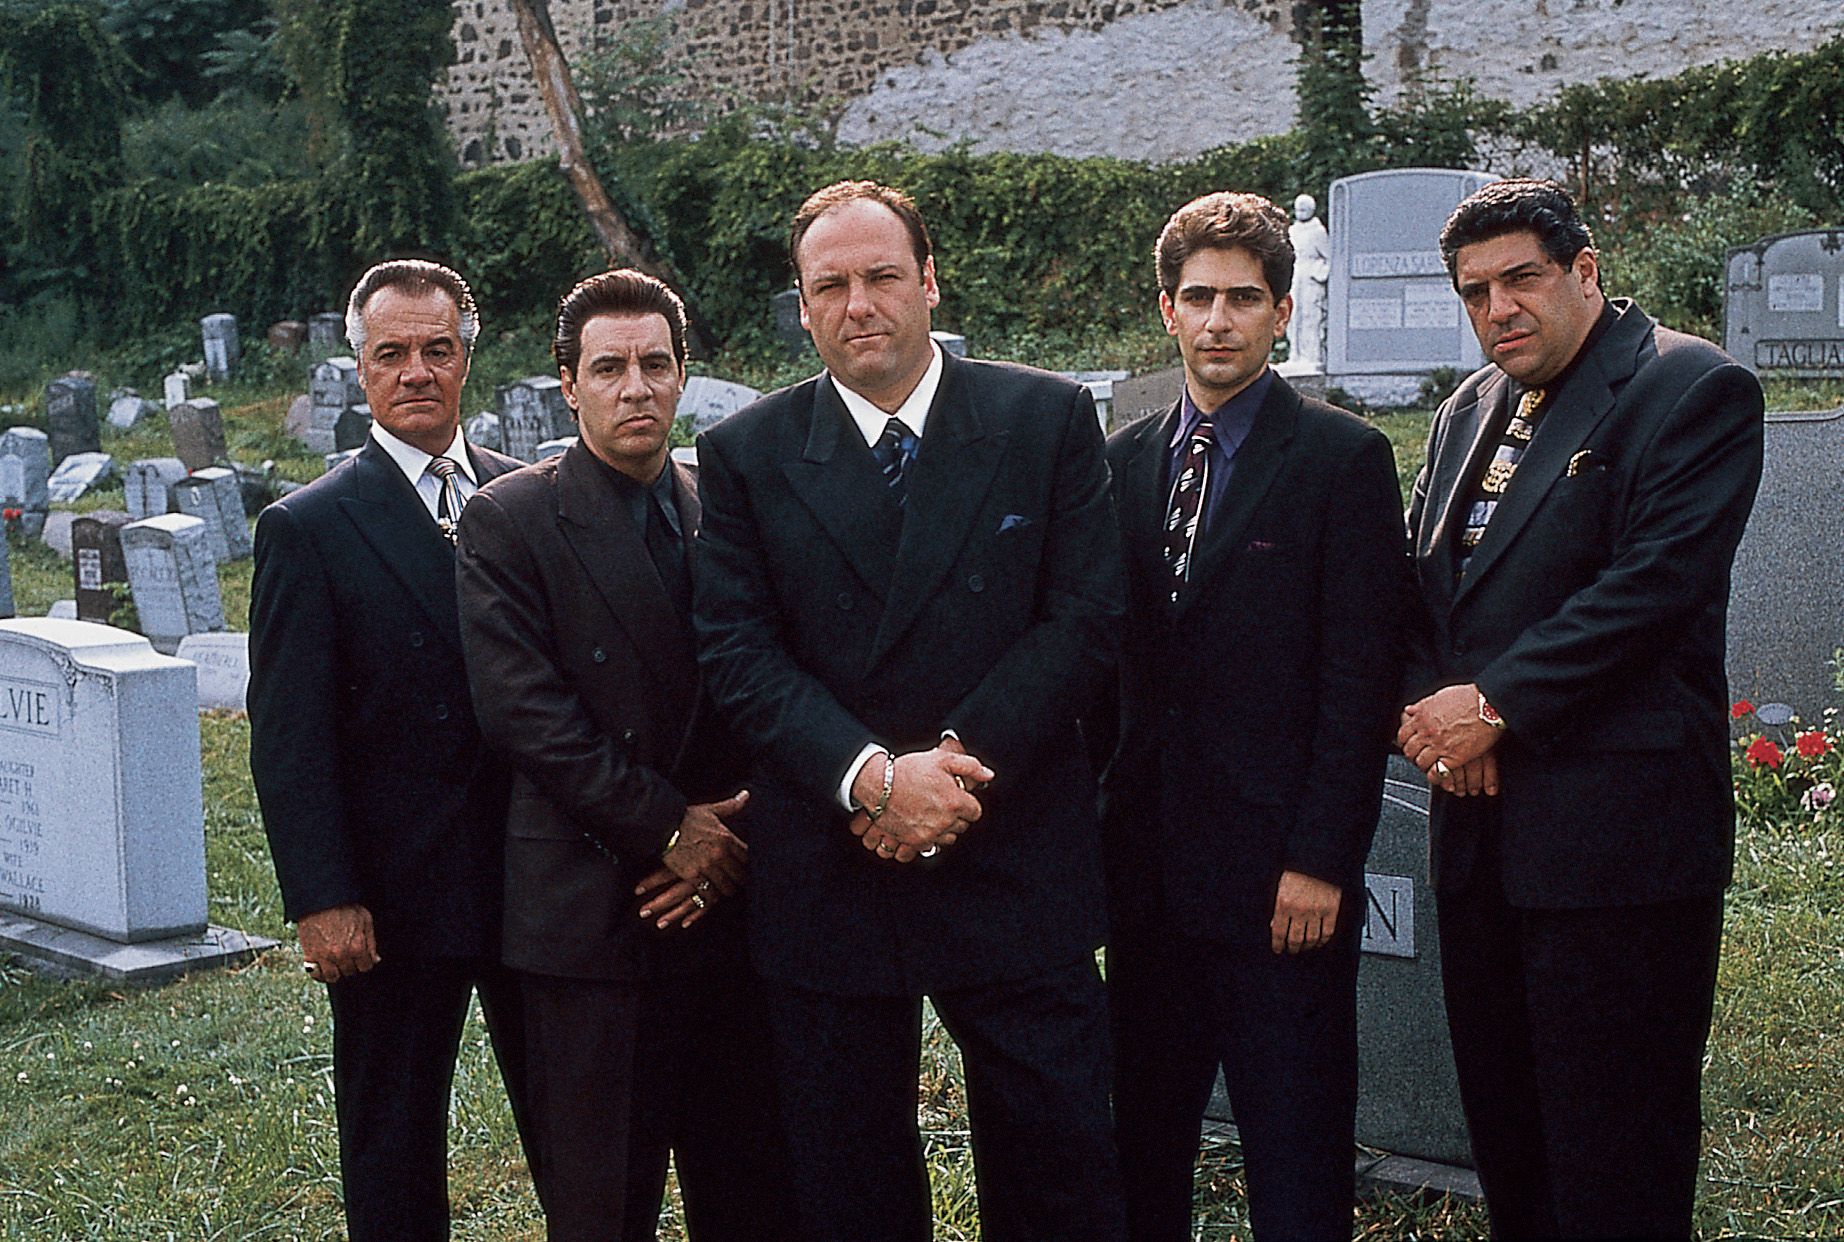 Still from "The Sopranos" with male cast standing in a cemetery.